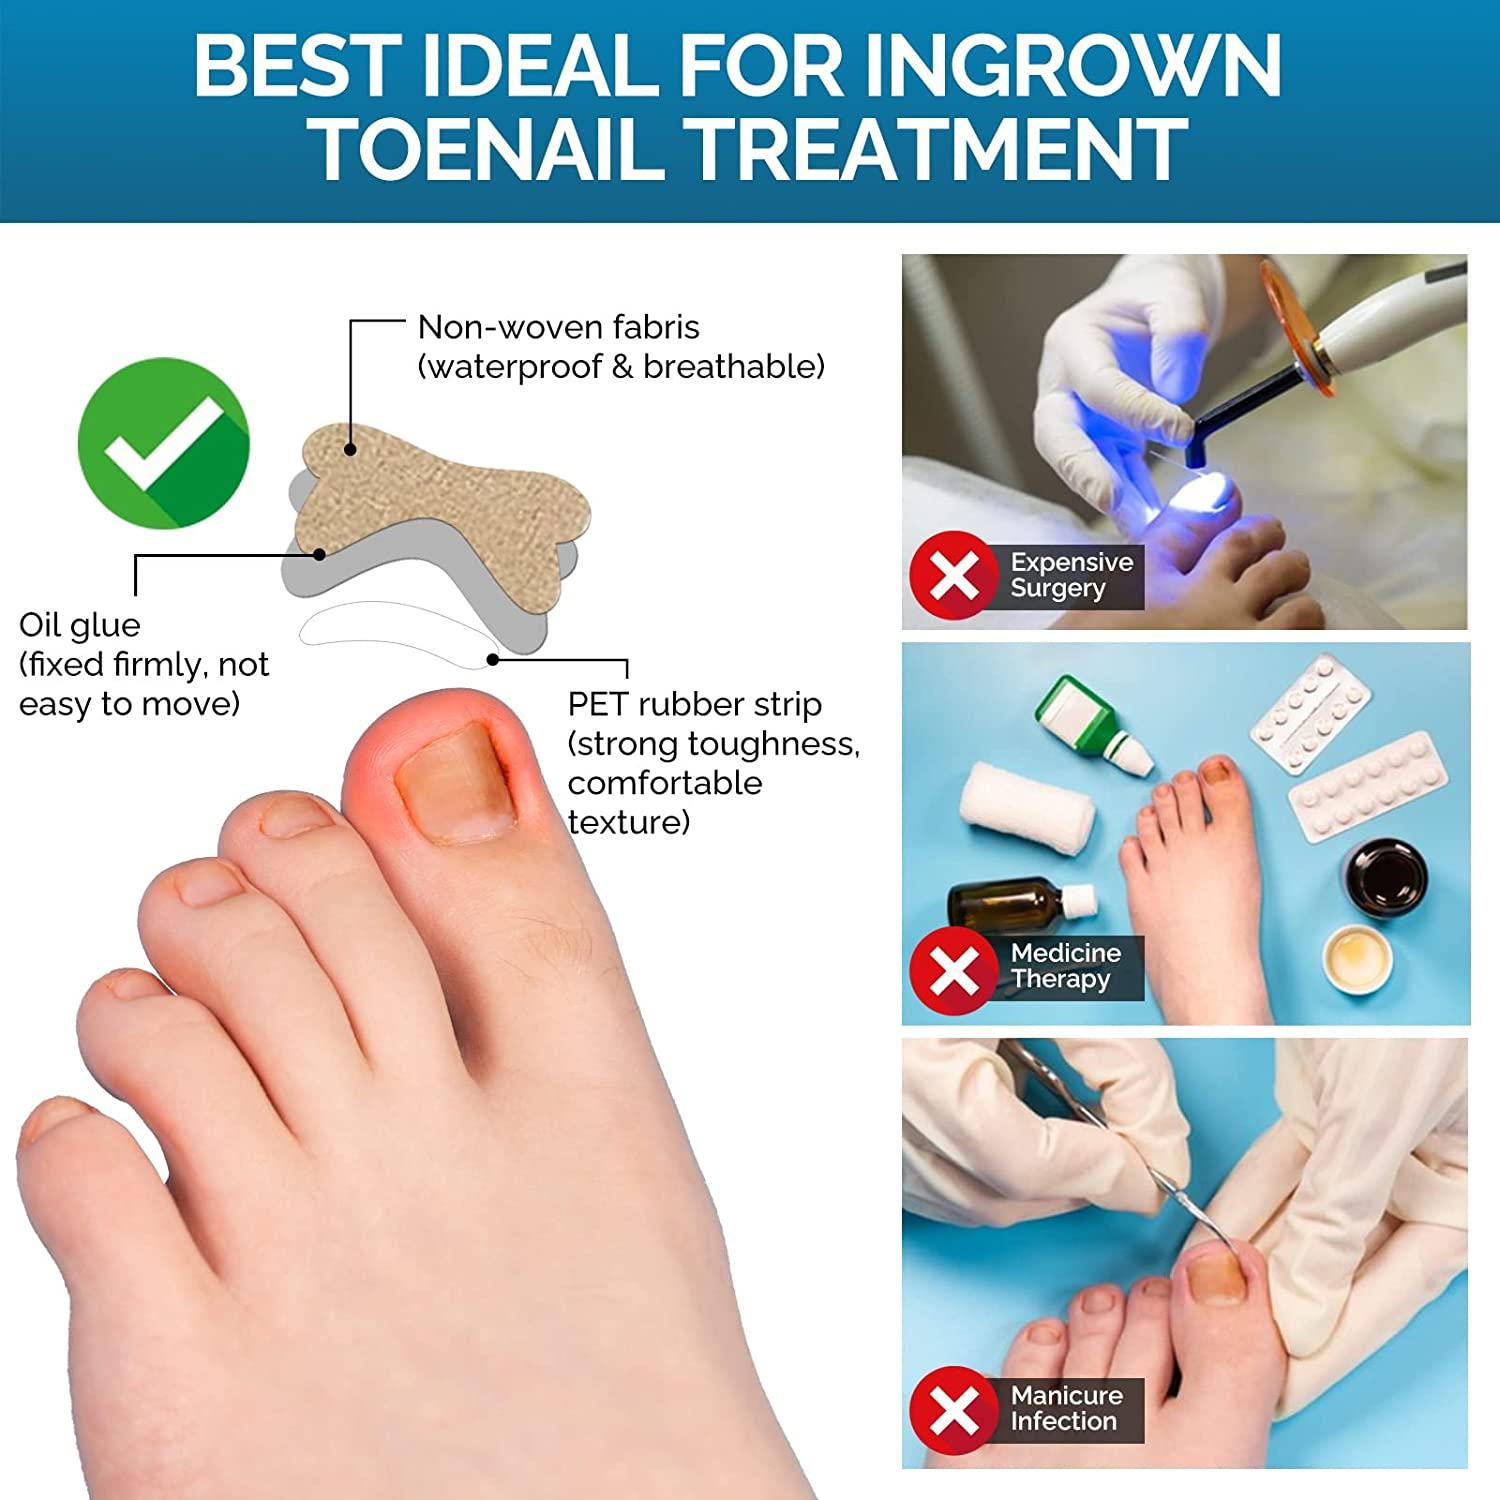 What are ingrown toenails and how are they treated?